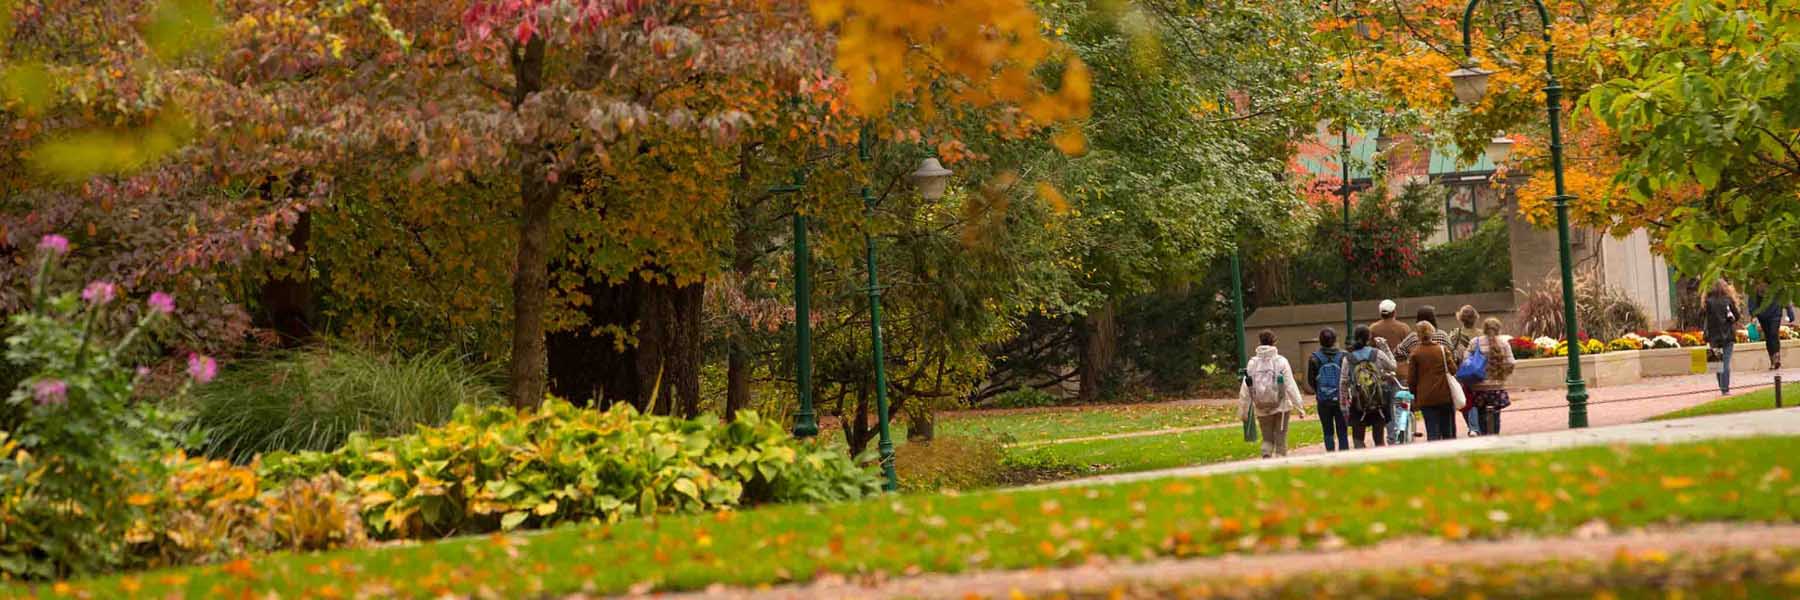 Students walking through campus in early fall